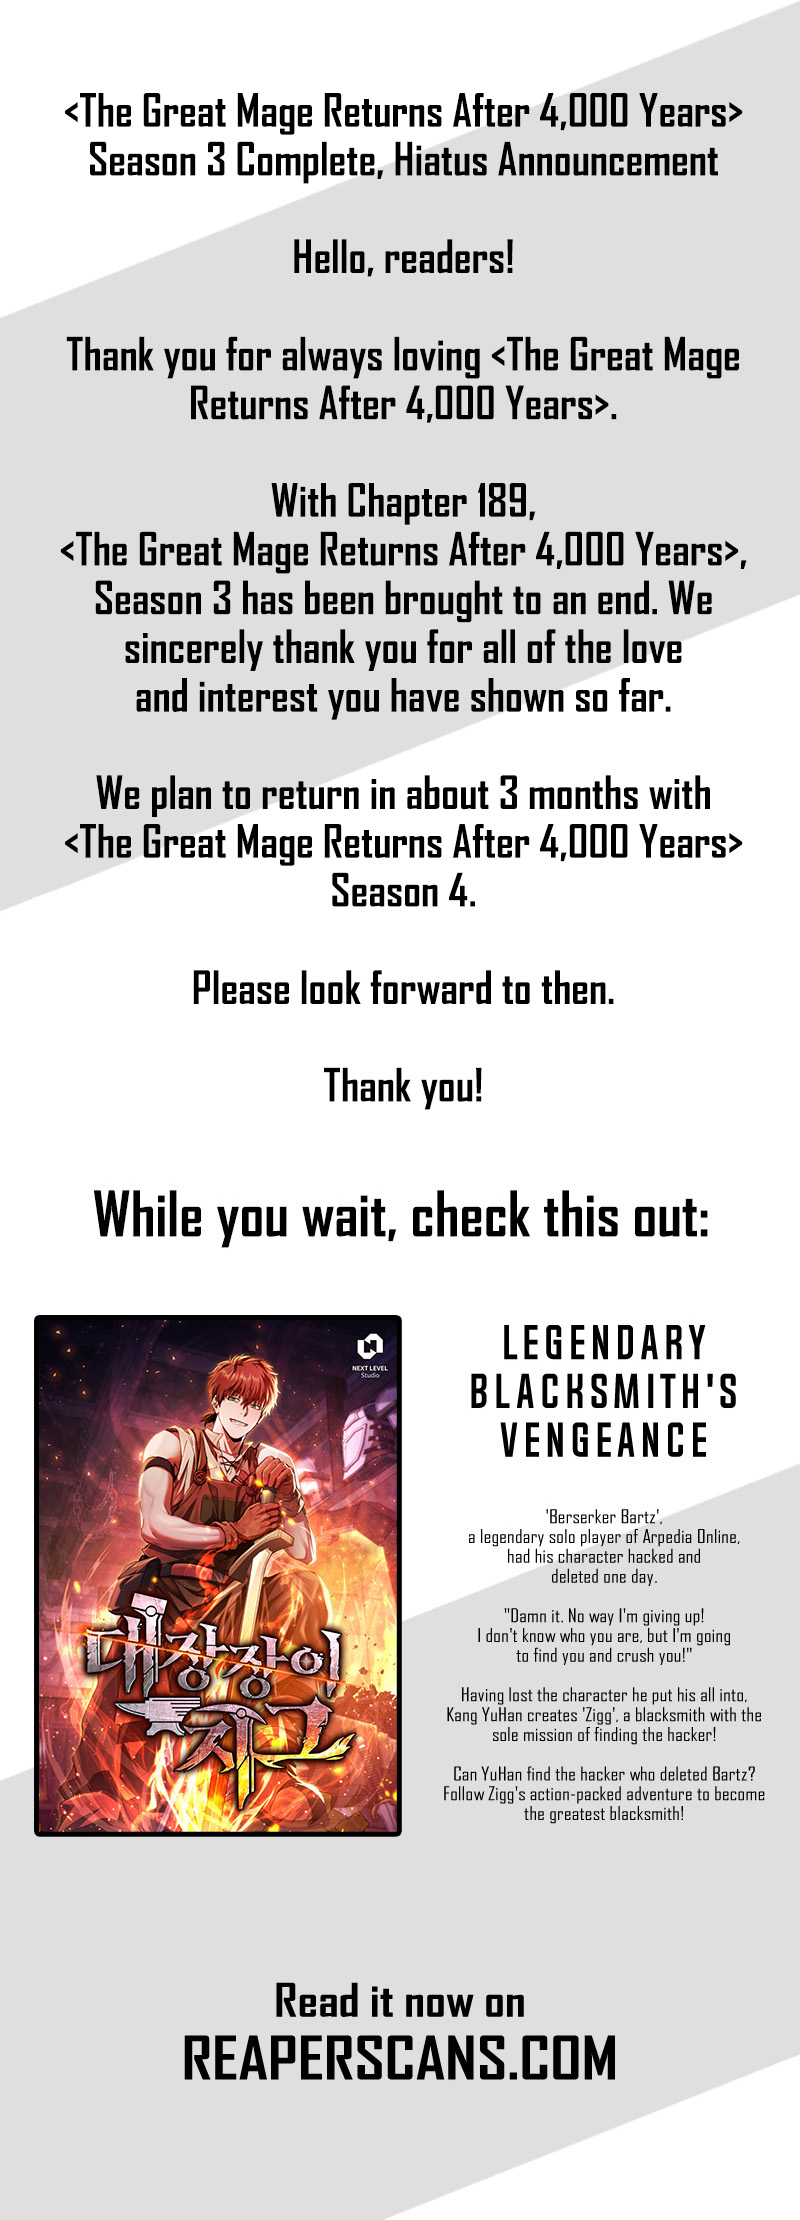 The Great Mage that Returned after 4000 Years image